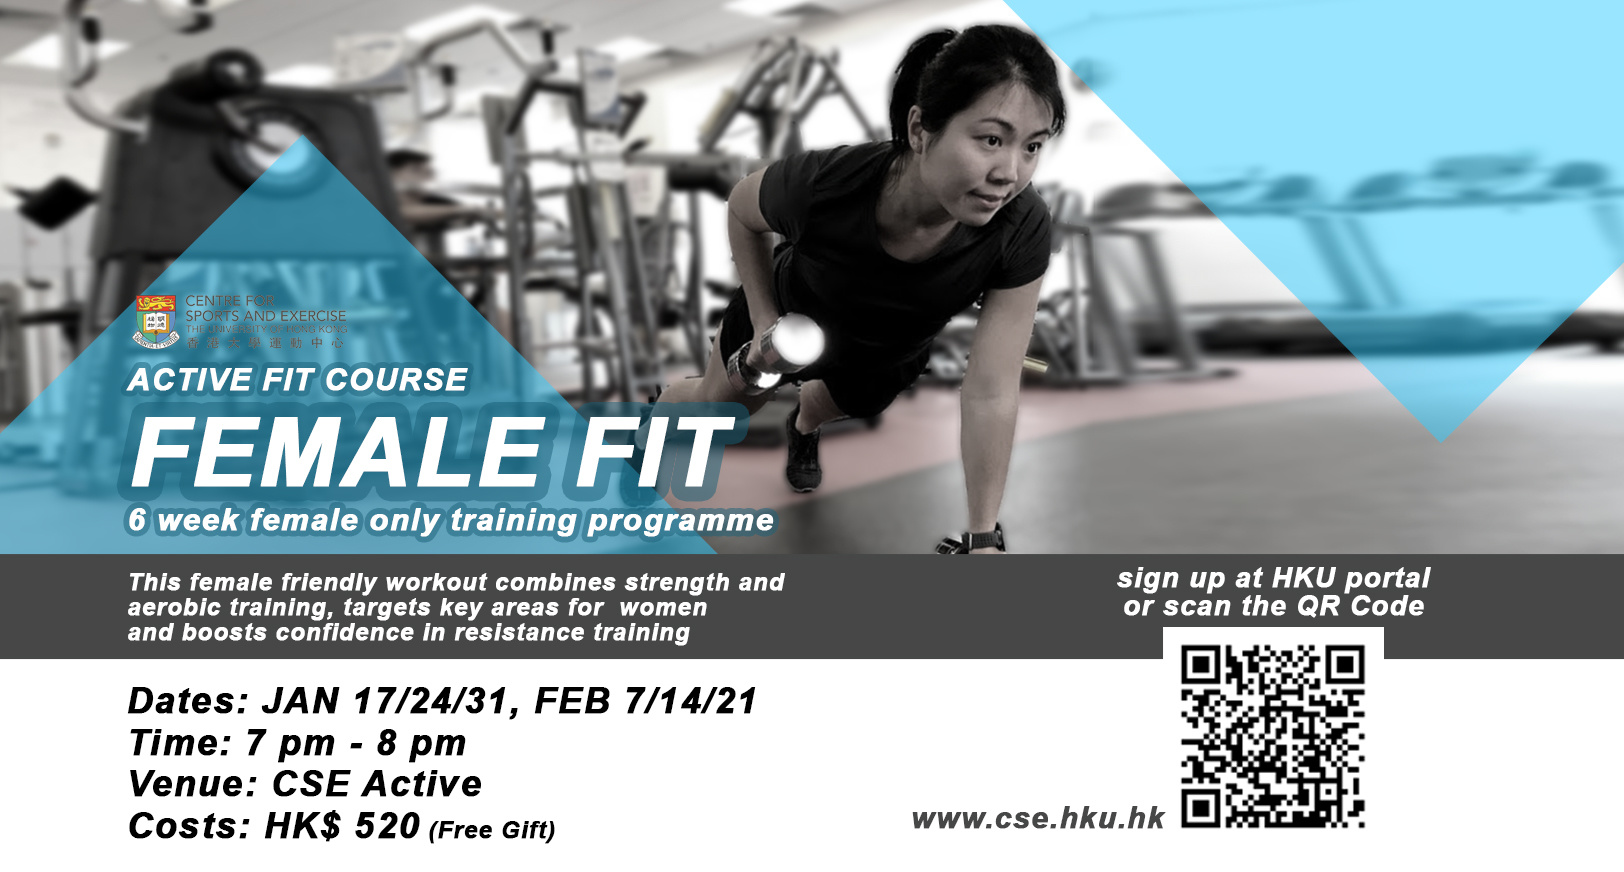 Active Fit Training Course - Female Fit